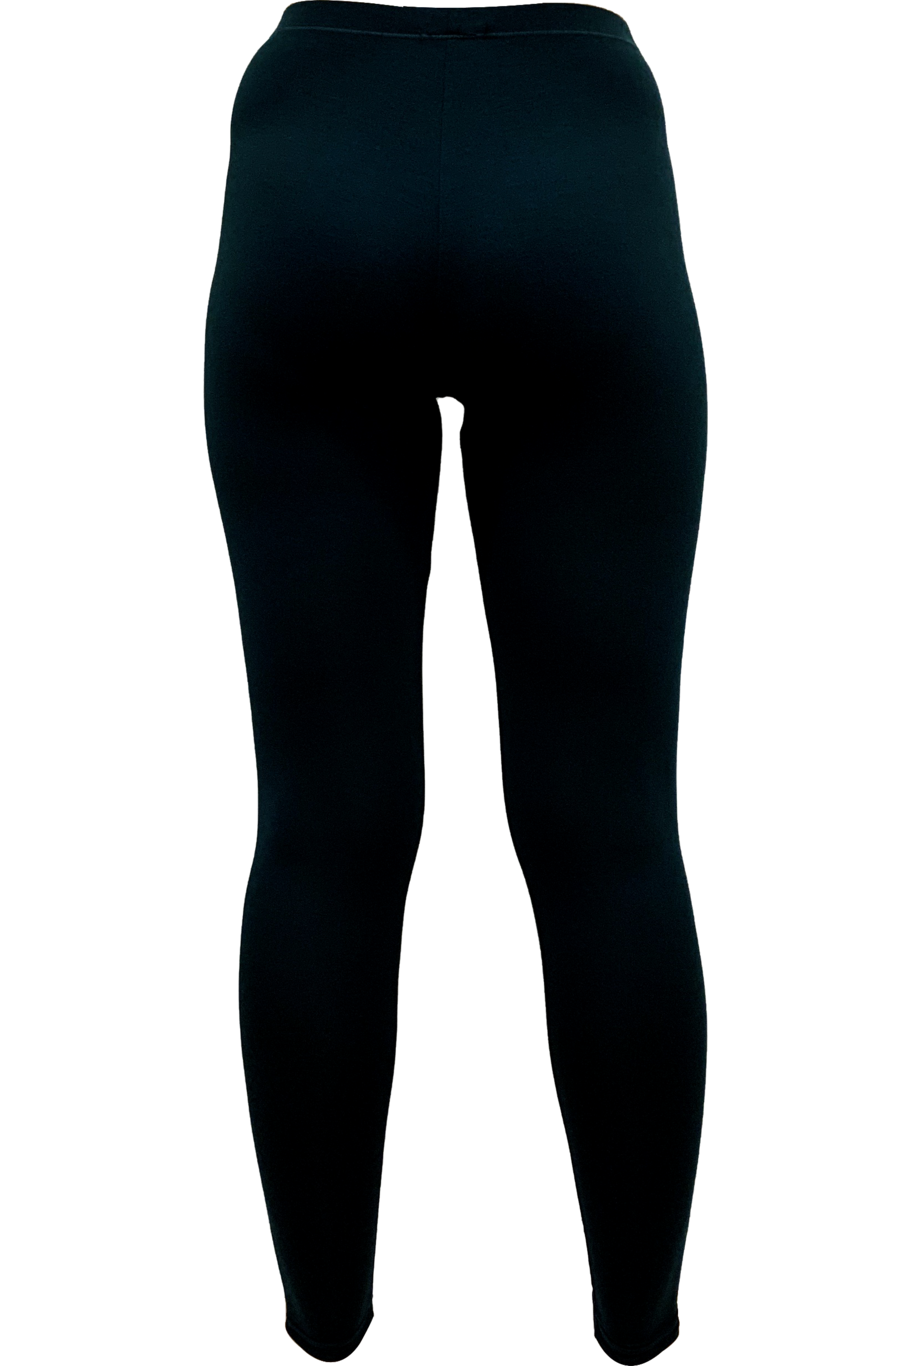 Buy 6 Pack Seamless Fleece Lined Leggings for Women - Winter, Workout &  Everyday Use - One Size (Multi Color) at Amazon.in